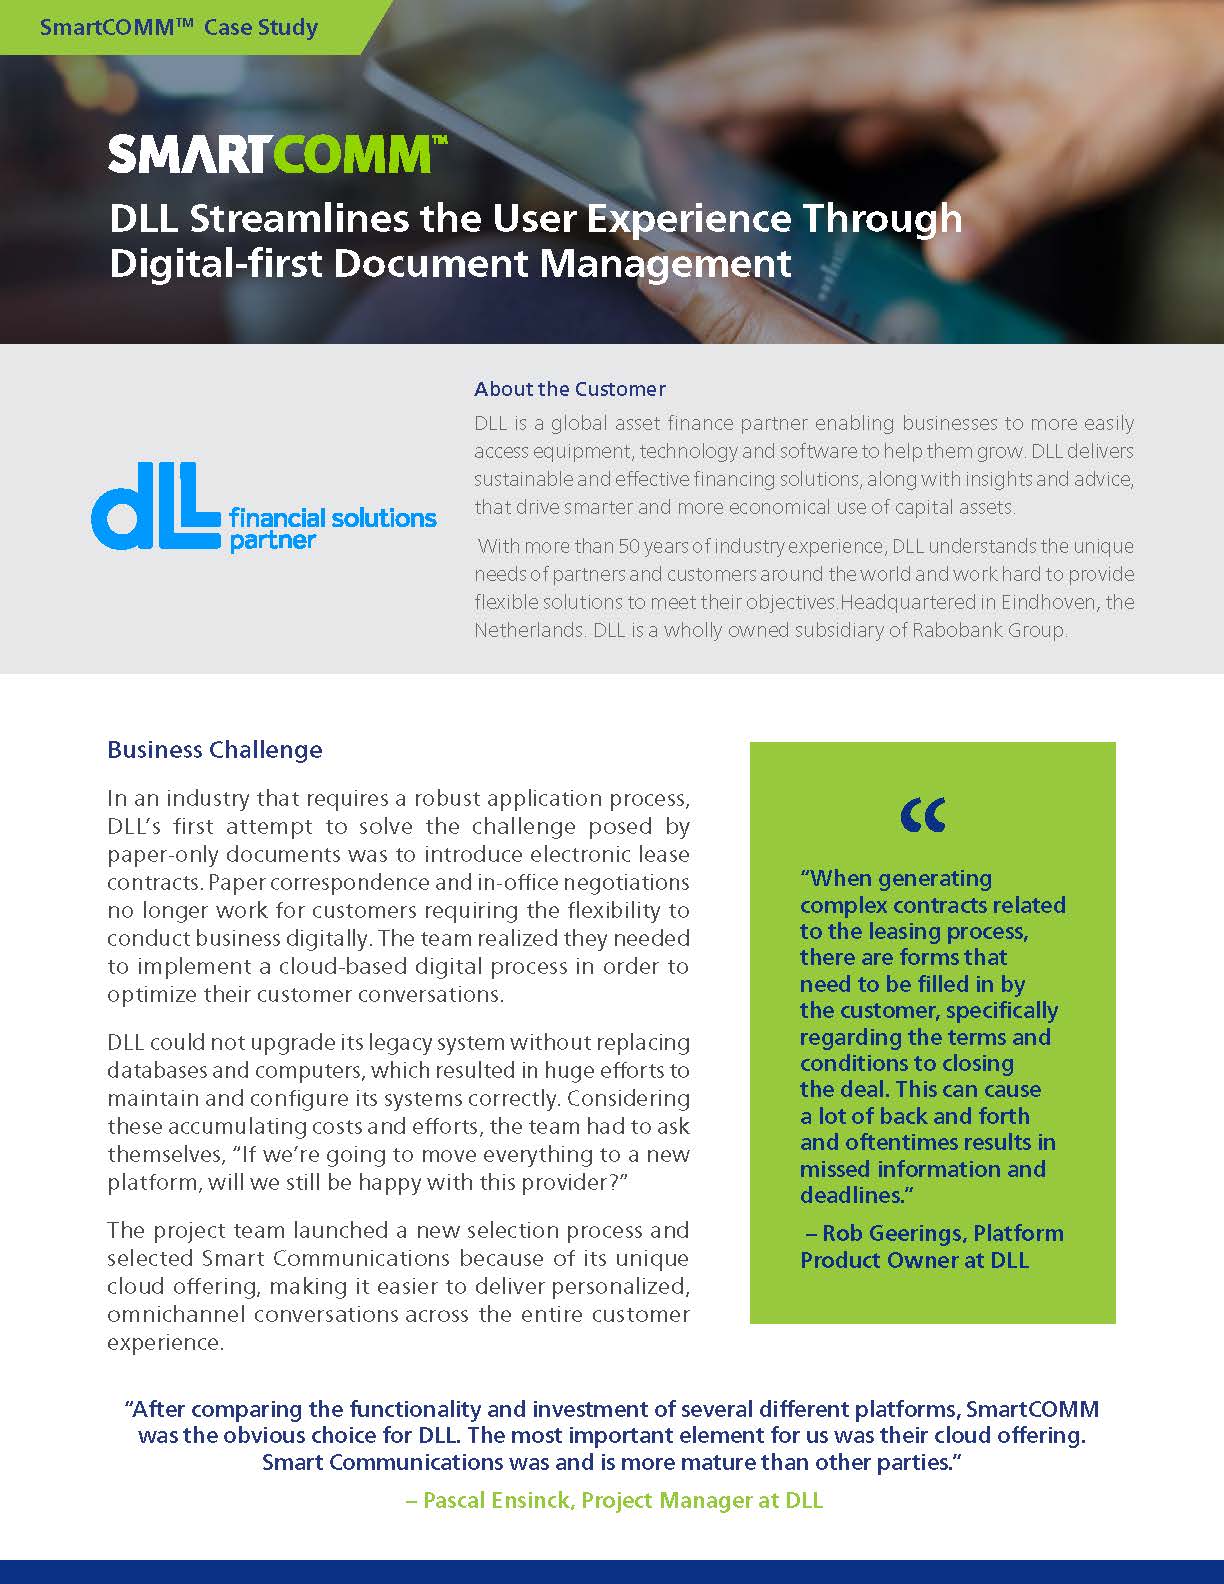 DLL-Streamlines-the-User-Experience-Through-Digital-First-Document-Management_Page_1.jpg